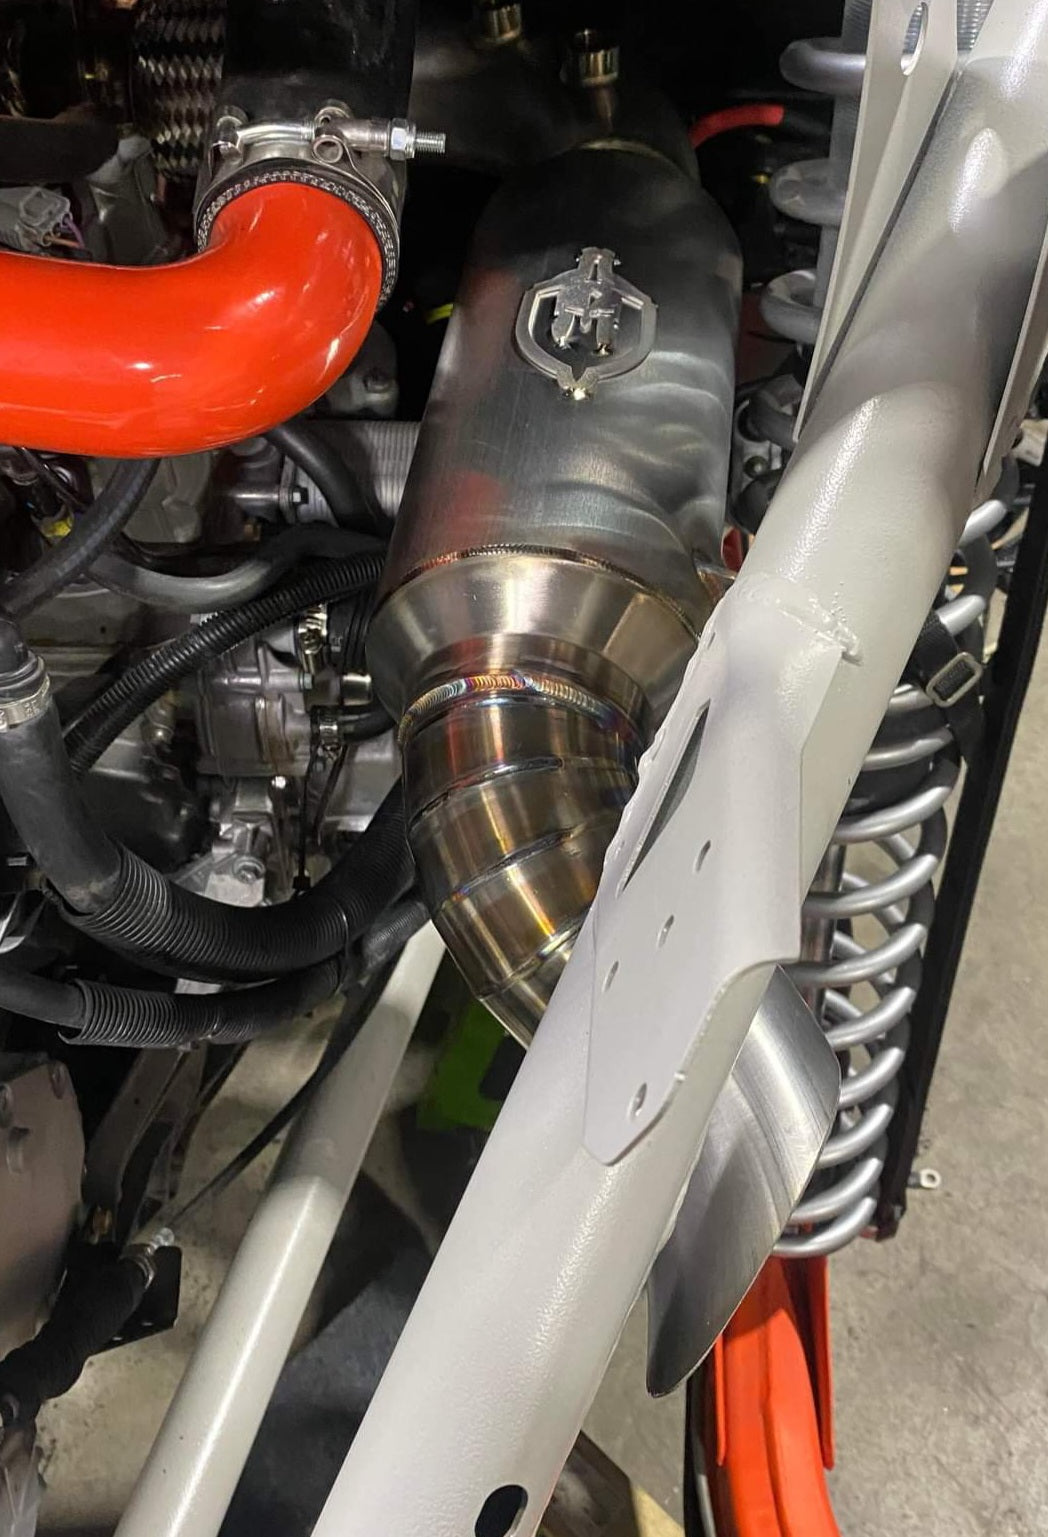 Ironclad Industries Stinger "side exit" exhaust